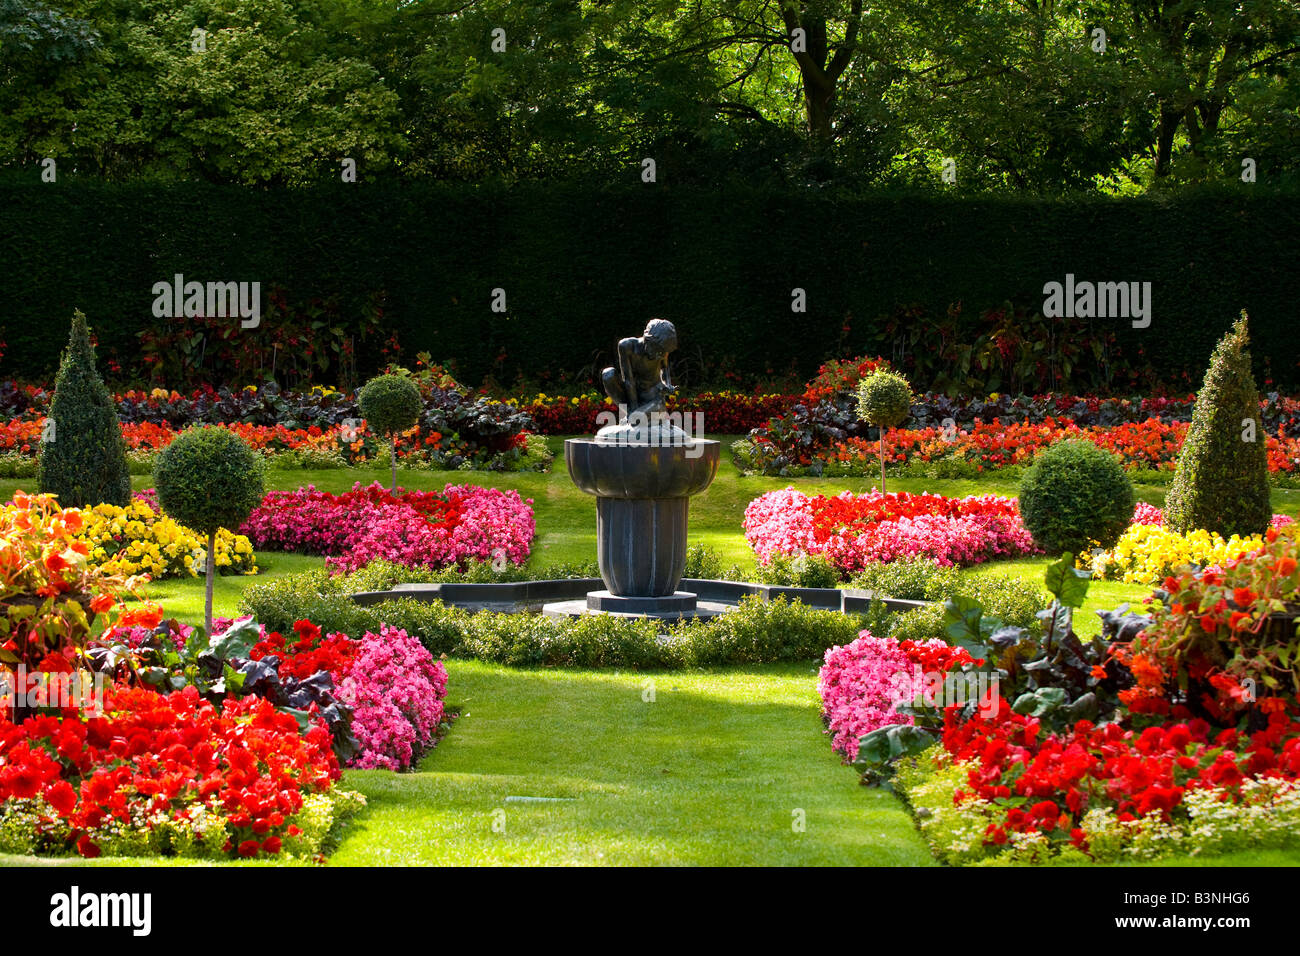 London , Regents Park Gardens , spectacular floral display of bedding plants and flowers with ornamental statue on podium Stock Photo